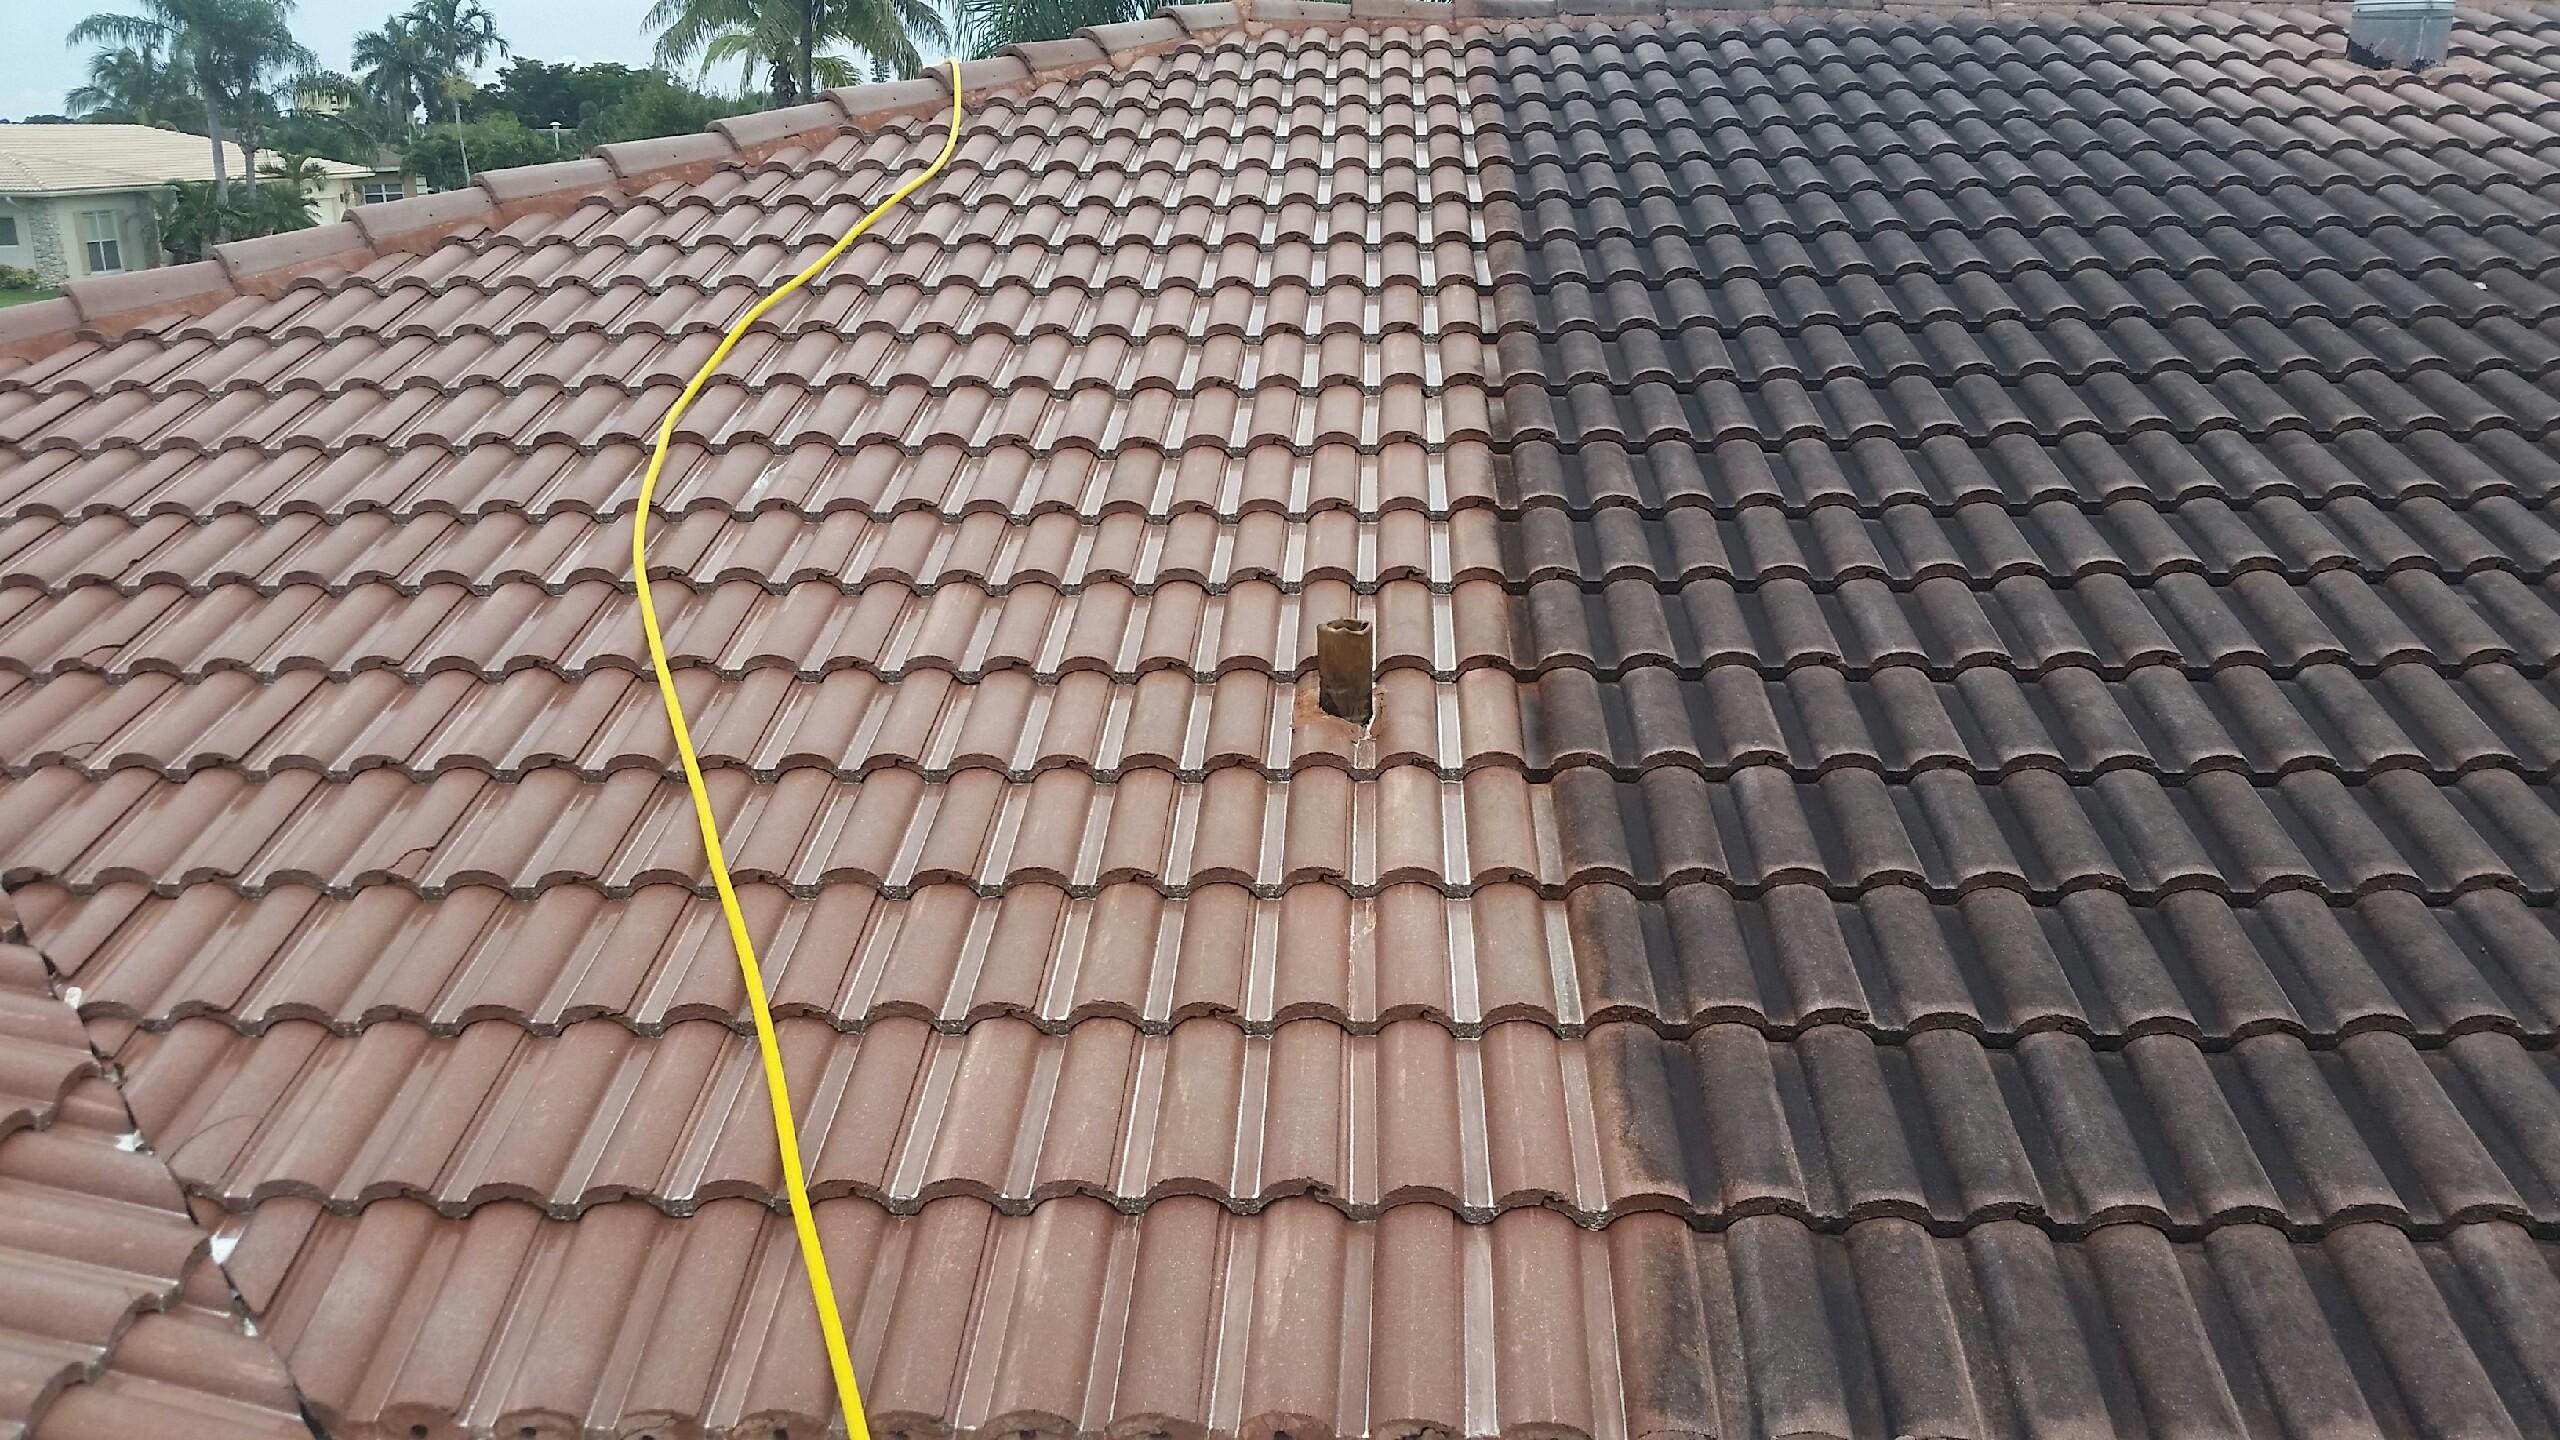 Roof Cleaning Services In Lafayette La